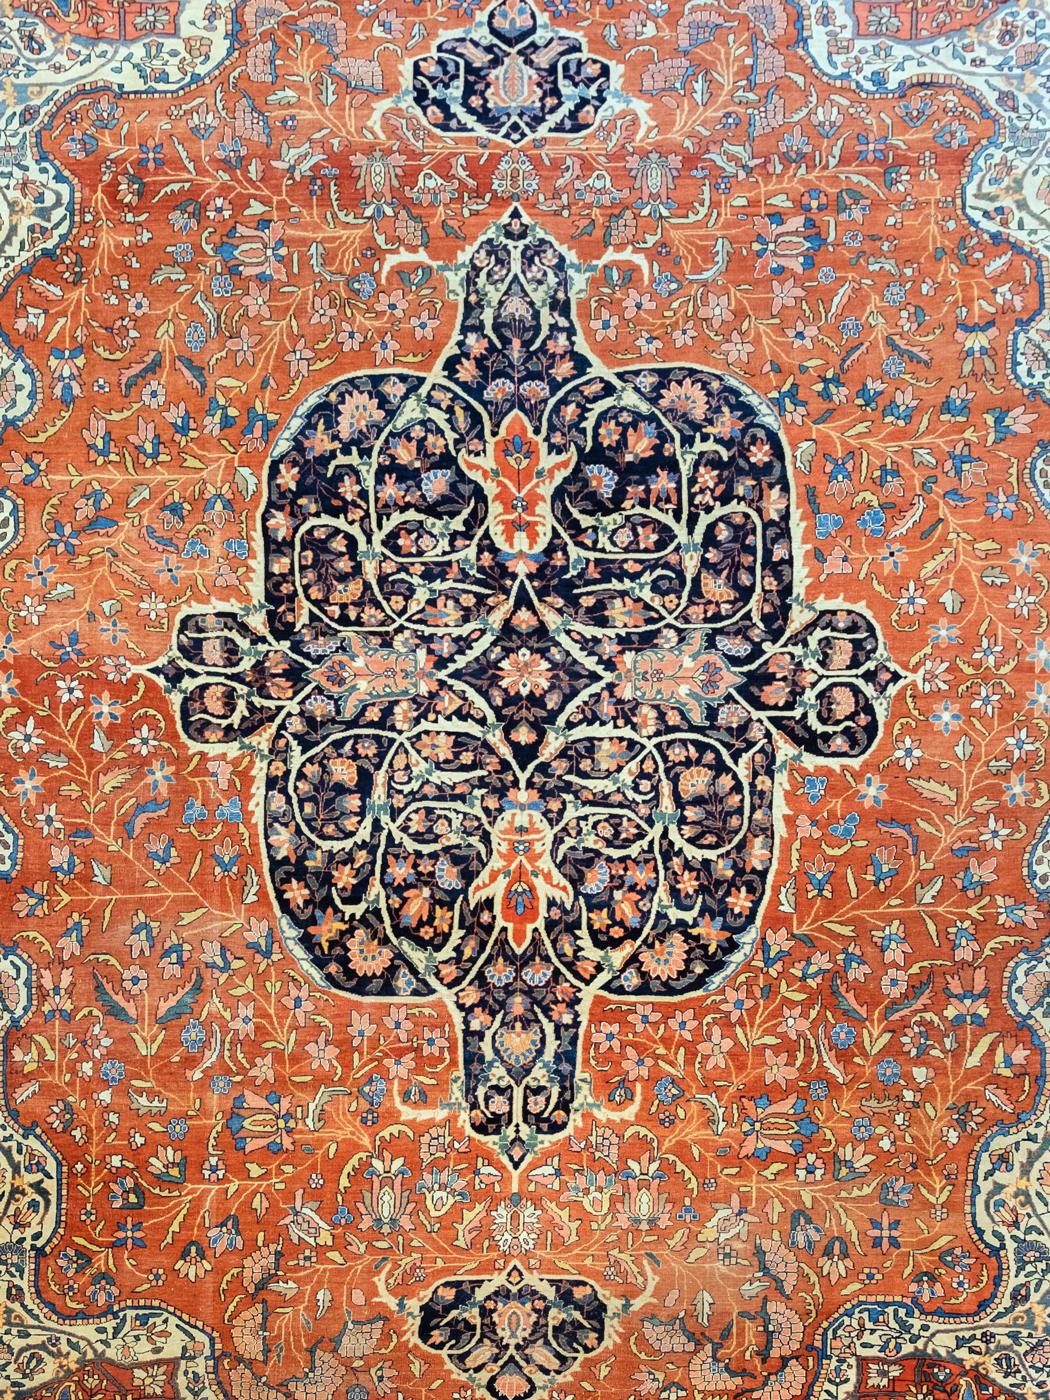 With a warm orange background and a deep indigo medallion, this hand knotted antique Farahan carpet measures 10’5” x 14’1”. Woven circa 1890 in a traditional Persian weave, the Classic Farahan design illustrates a blooming flower garden decorated